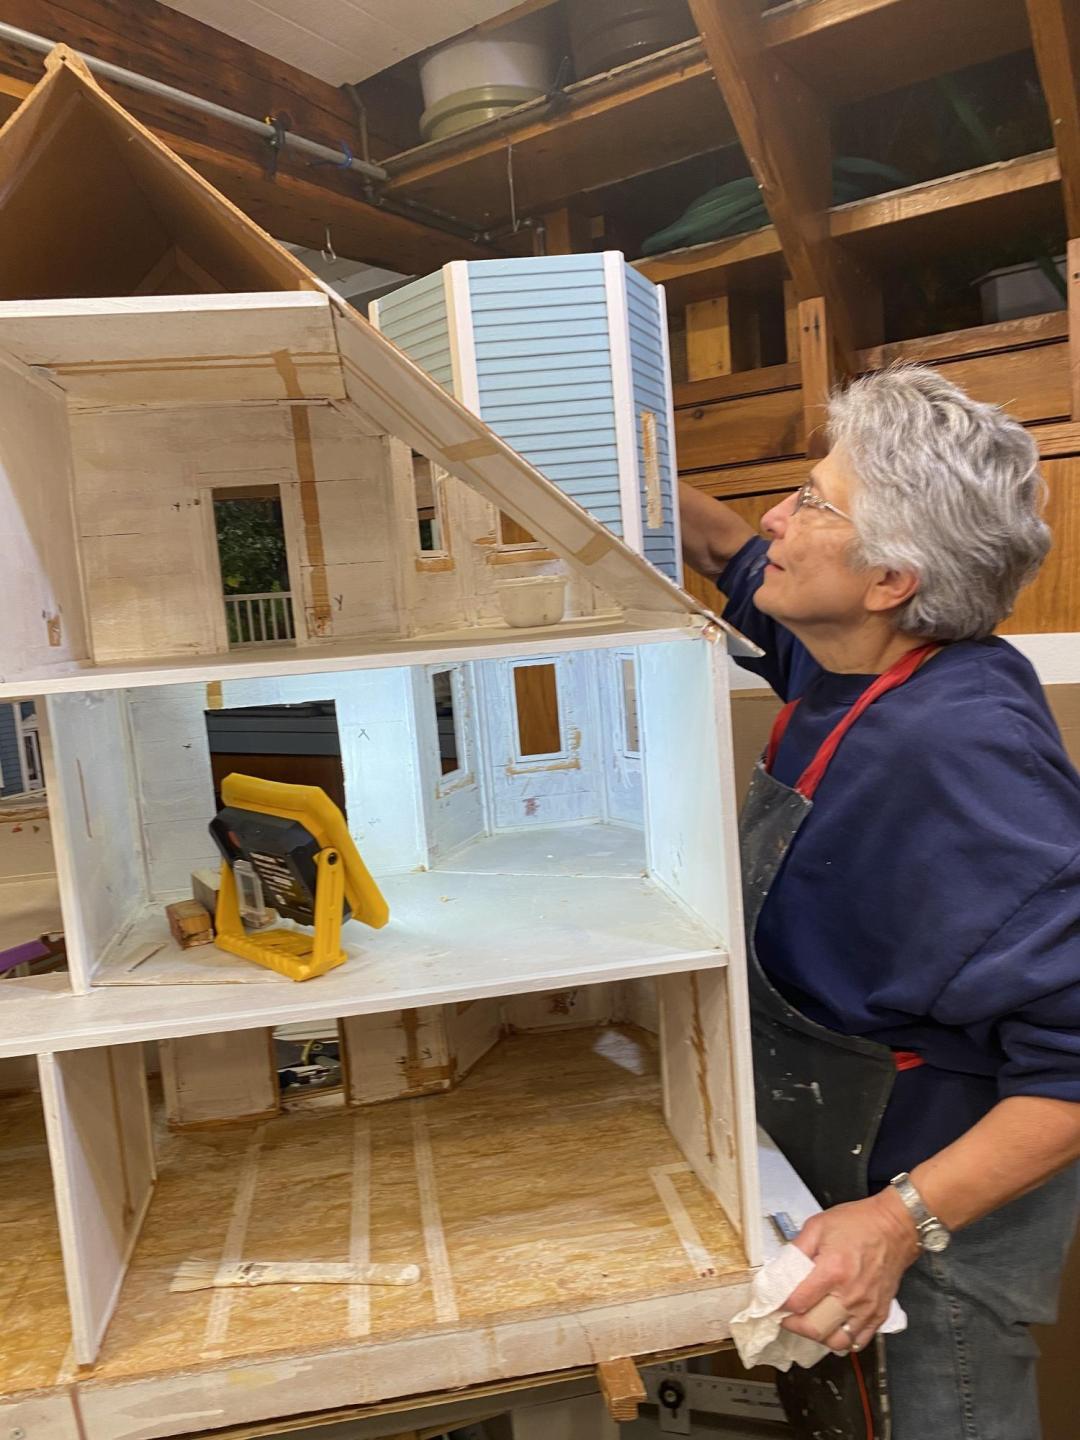 Sharon Ewert works on one of the many dollhouses that she and her husband Norm have donated to MCC over the years. The project began as an extension of the Thursday night "Menno Meals" they hosted in their home.